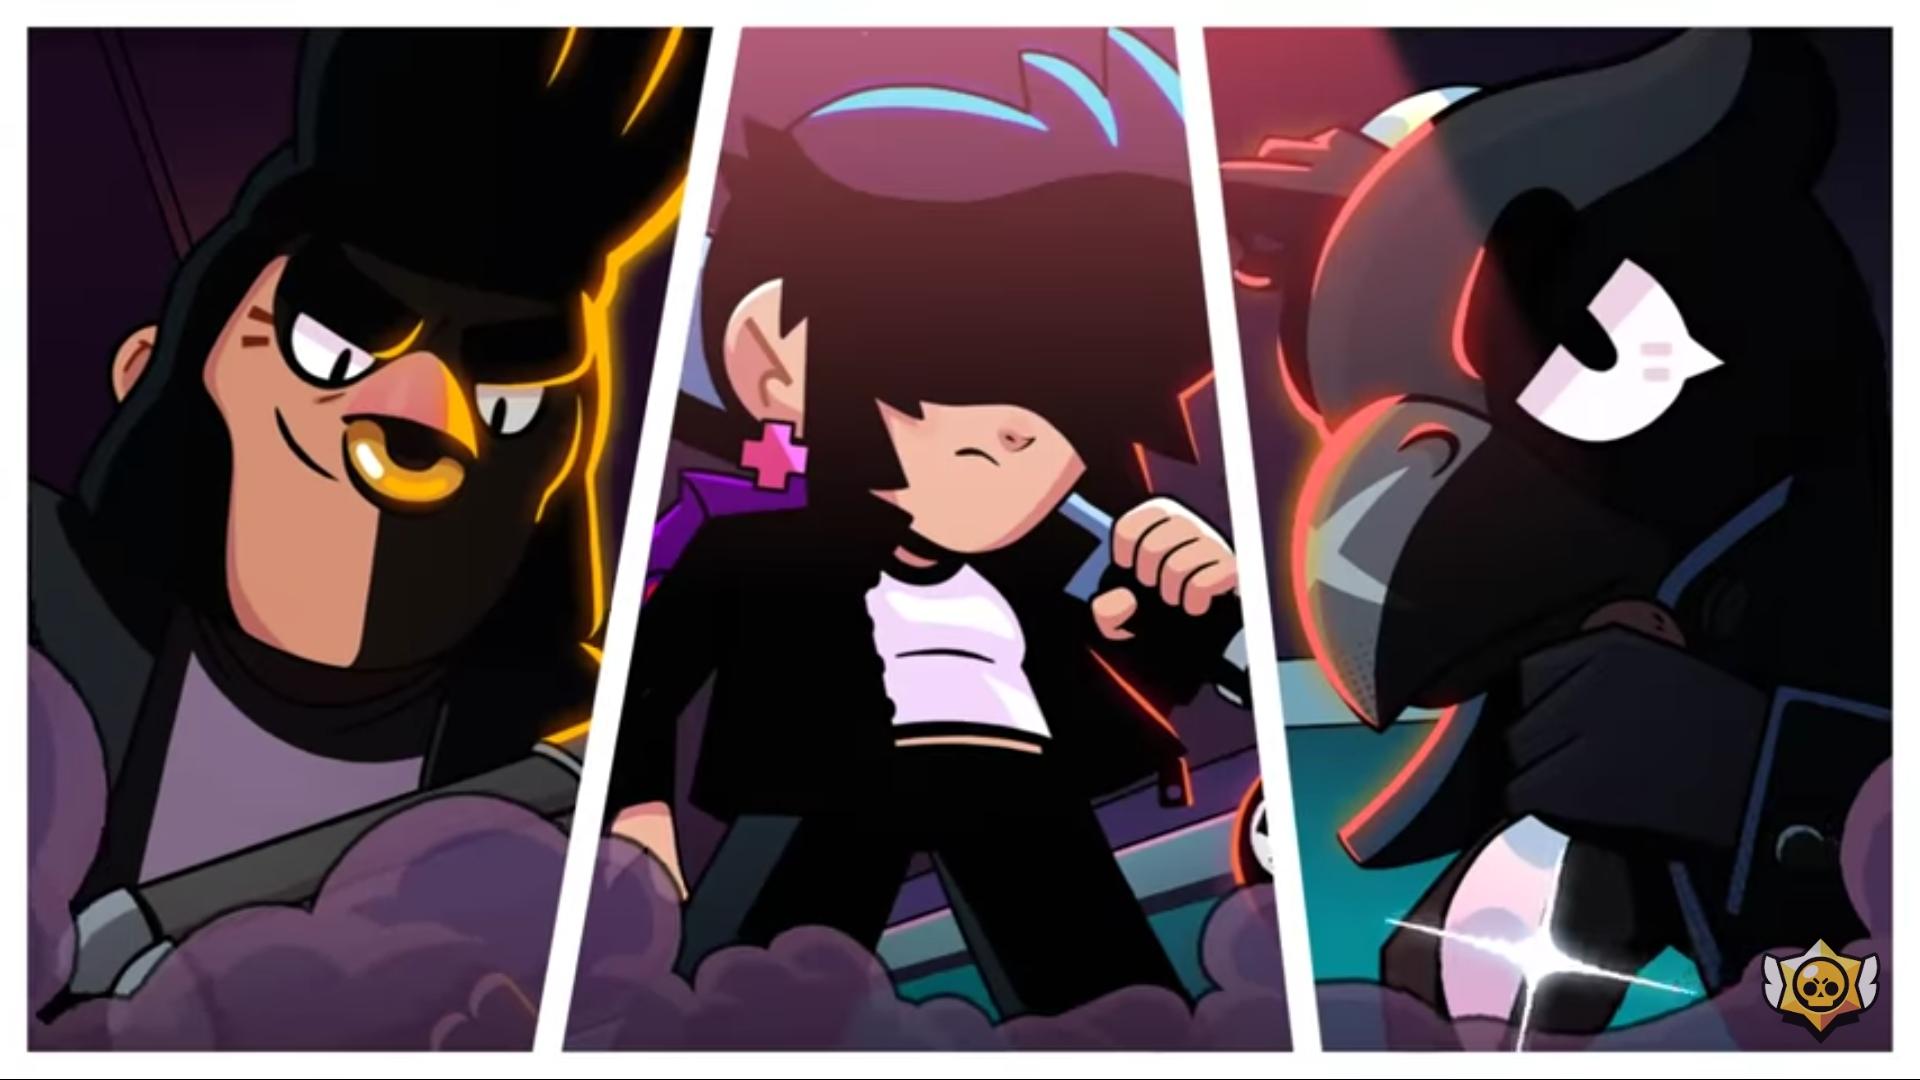 Who's the middle brawler? Is it aknew brawler?Is it simon? Comment